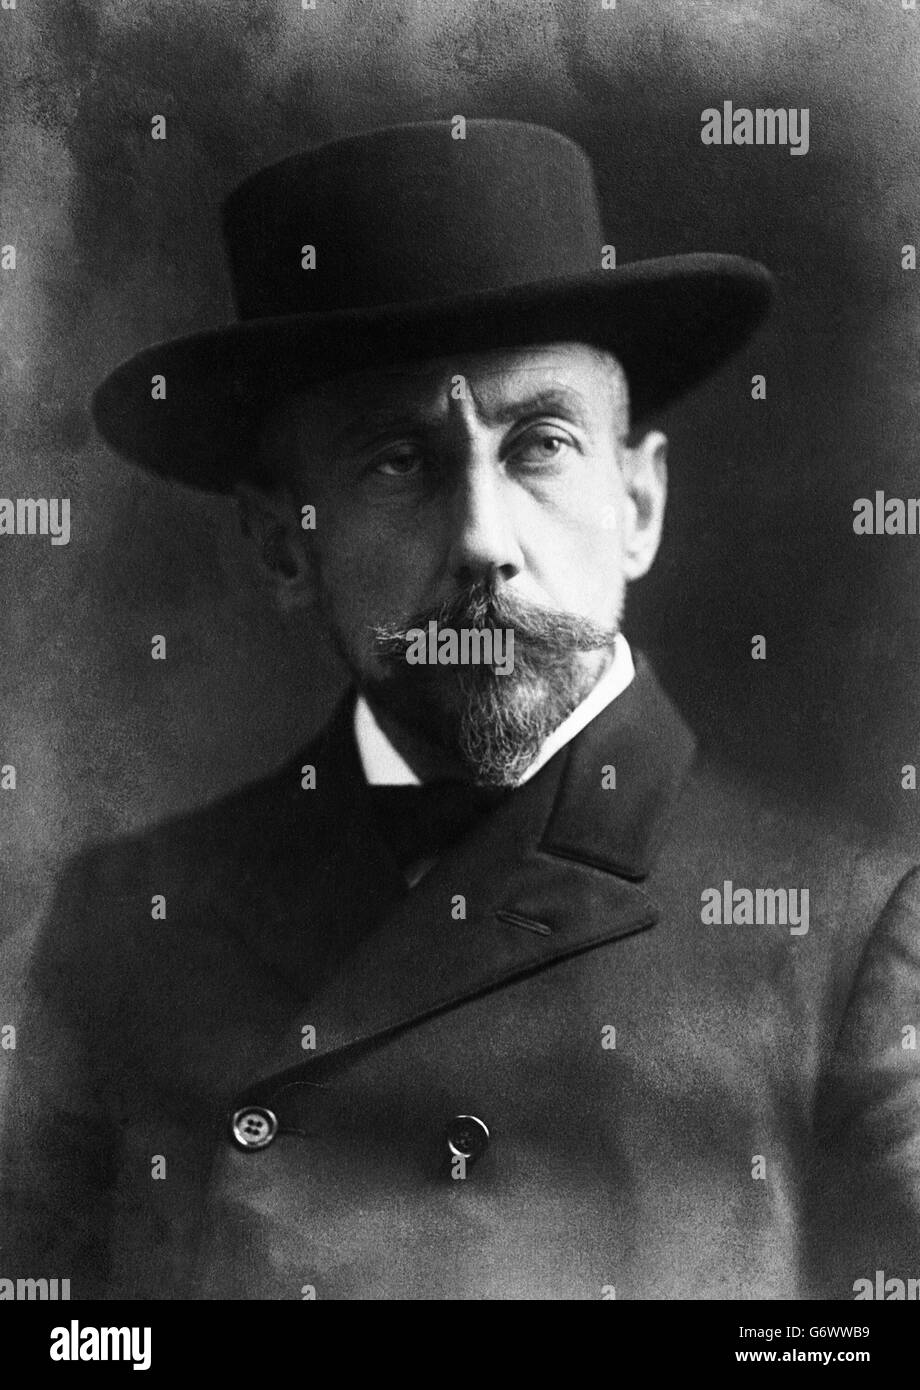 The Norwegian explorer, Roald Amundsen.He led the first Antarctic expedition to the South Pole between 1910 and 1912. He was also the first person to reach both the North and South Poles.He was the great rival to both Captain Robert Falcon Scott and Ernest Shackleton. Stock Photo